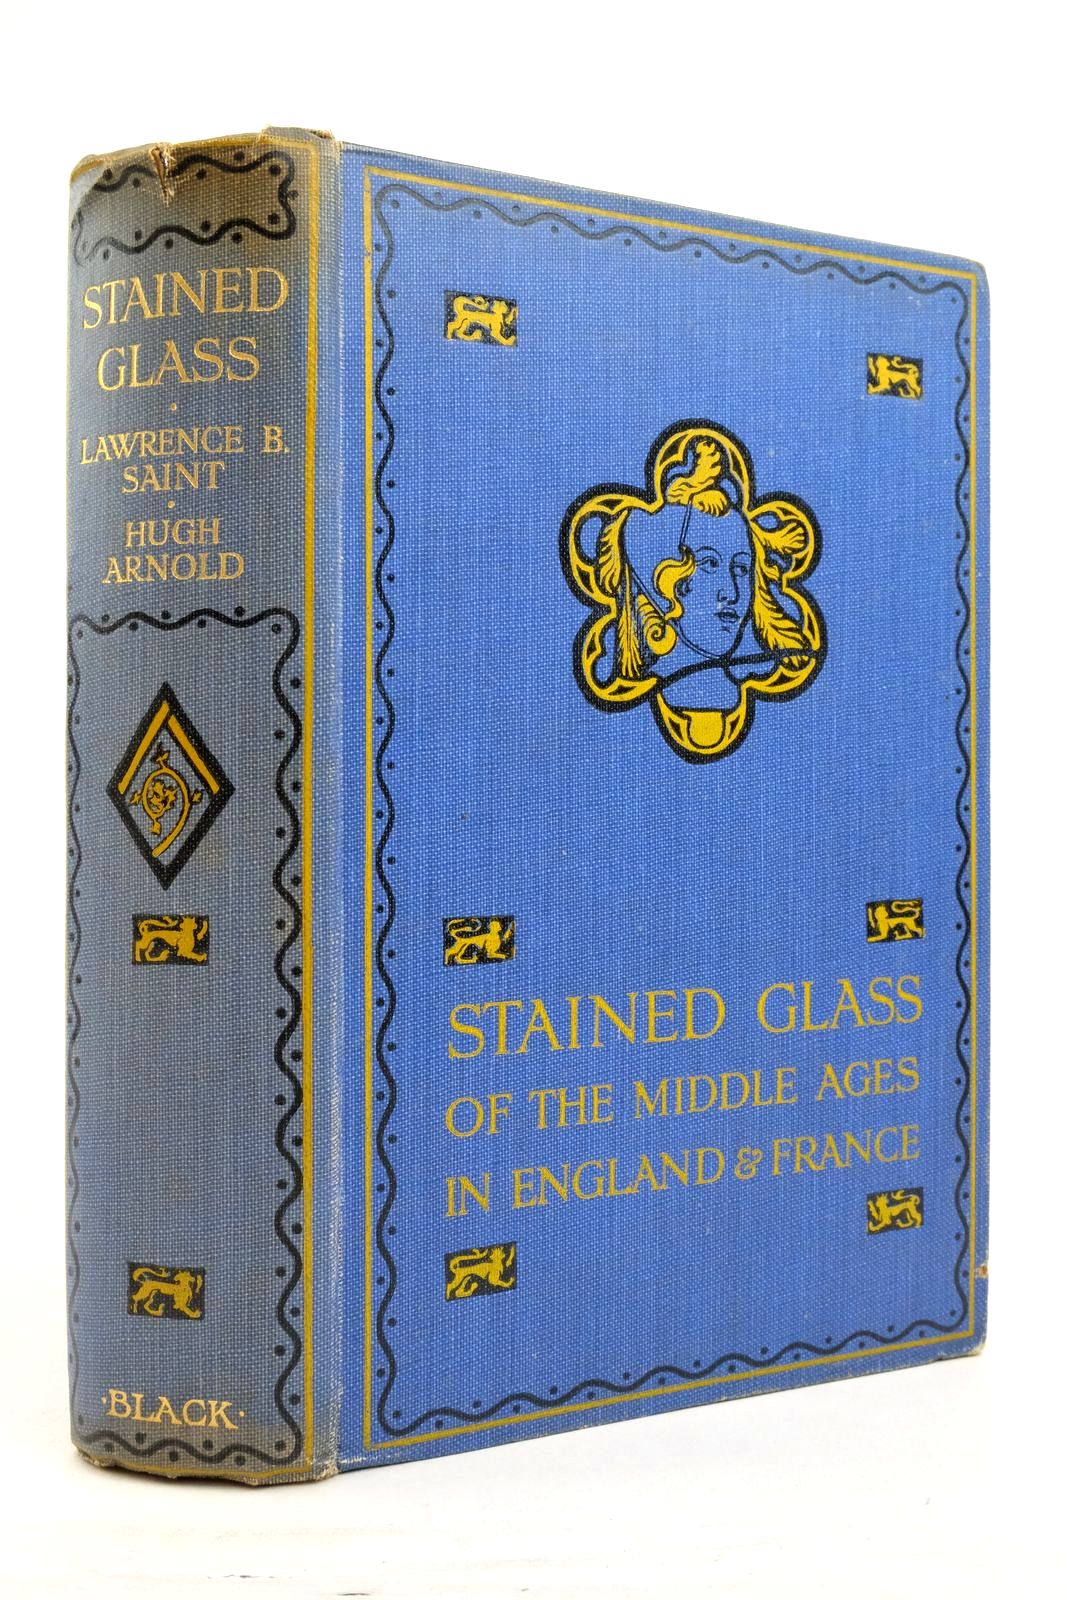 Photo of STAINED GLASS OF THE MIDDLE AGES IN ENGLAND AND FRANCE written by Arnold, Hugh illustrated by Saint, Lawrence B. published by A. & C. Black Ltd. (STOCK CODE: 2136954)  for sale by Stella & Rose's Books